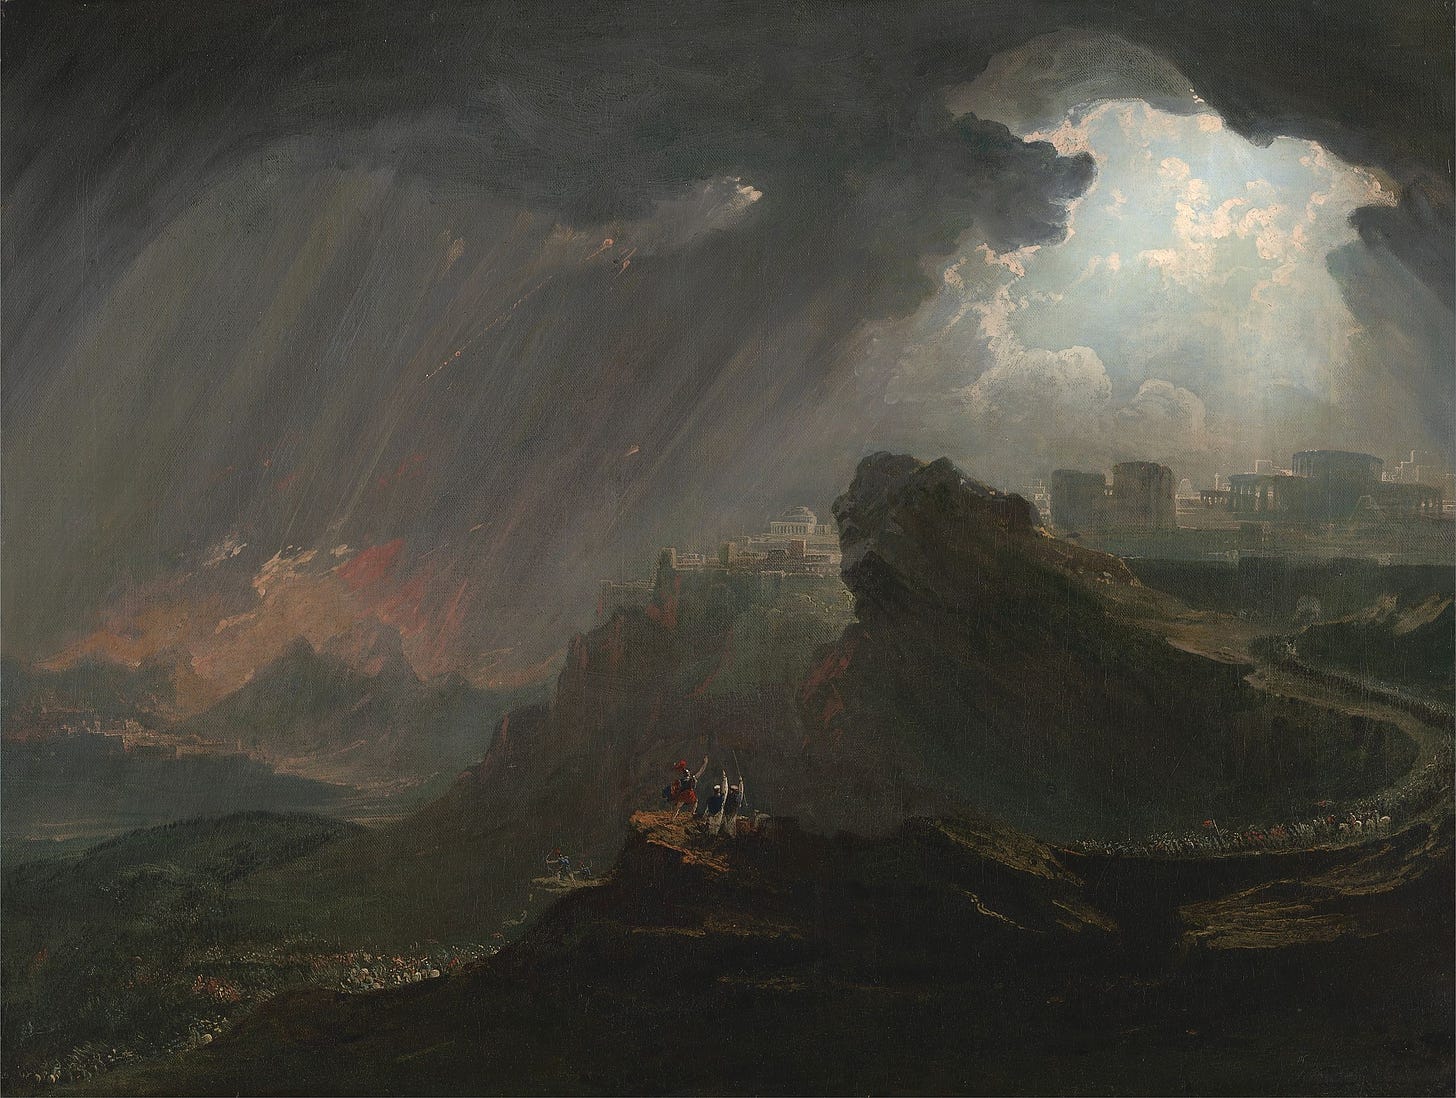 Joshua Commanding the Sun to Stand Still (c. 1840). Oil on canvas, 47.9 x 108.3 cm. Yale Center for British Art, New Haven, Connecticut